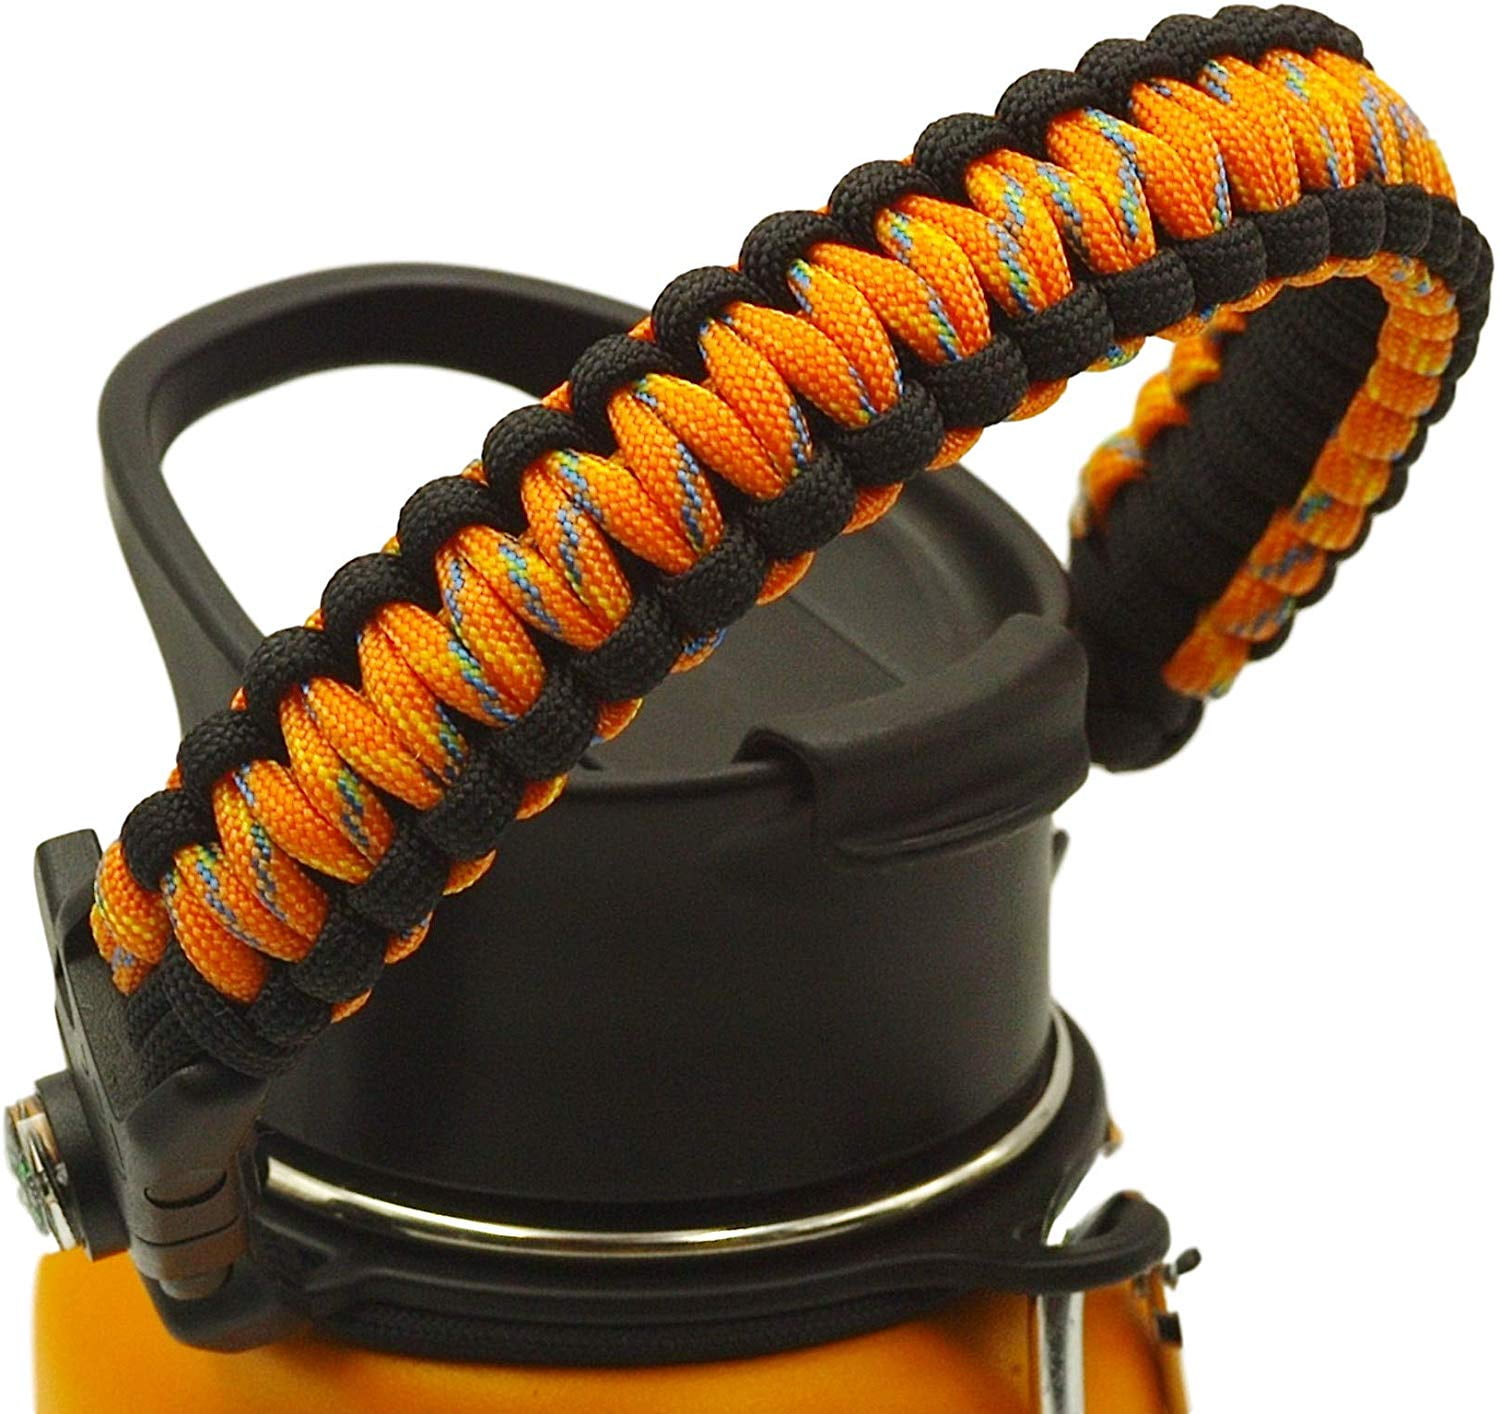 Iron °FLASK Paracord Handle - Fits Wide Mouth Water Bottles - Durable Carrier, Secure Accessories, Survival Strap Cord, Safety Ring, and Carabiner 